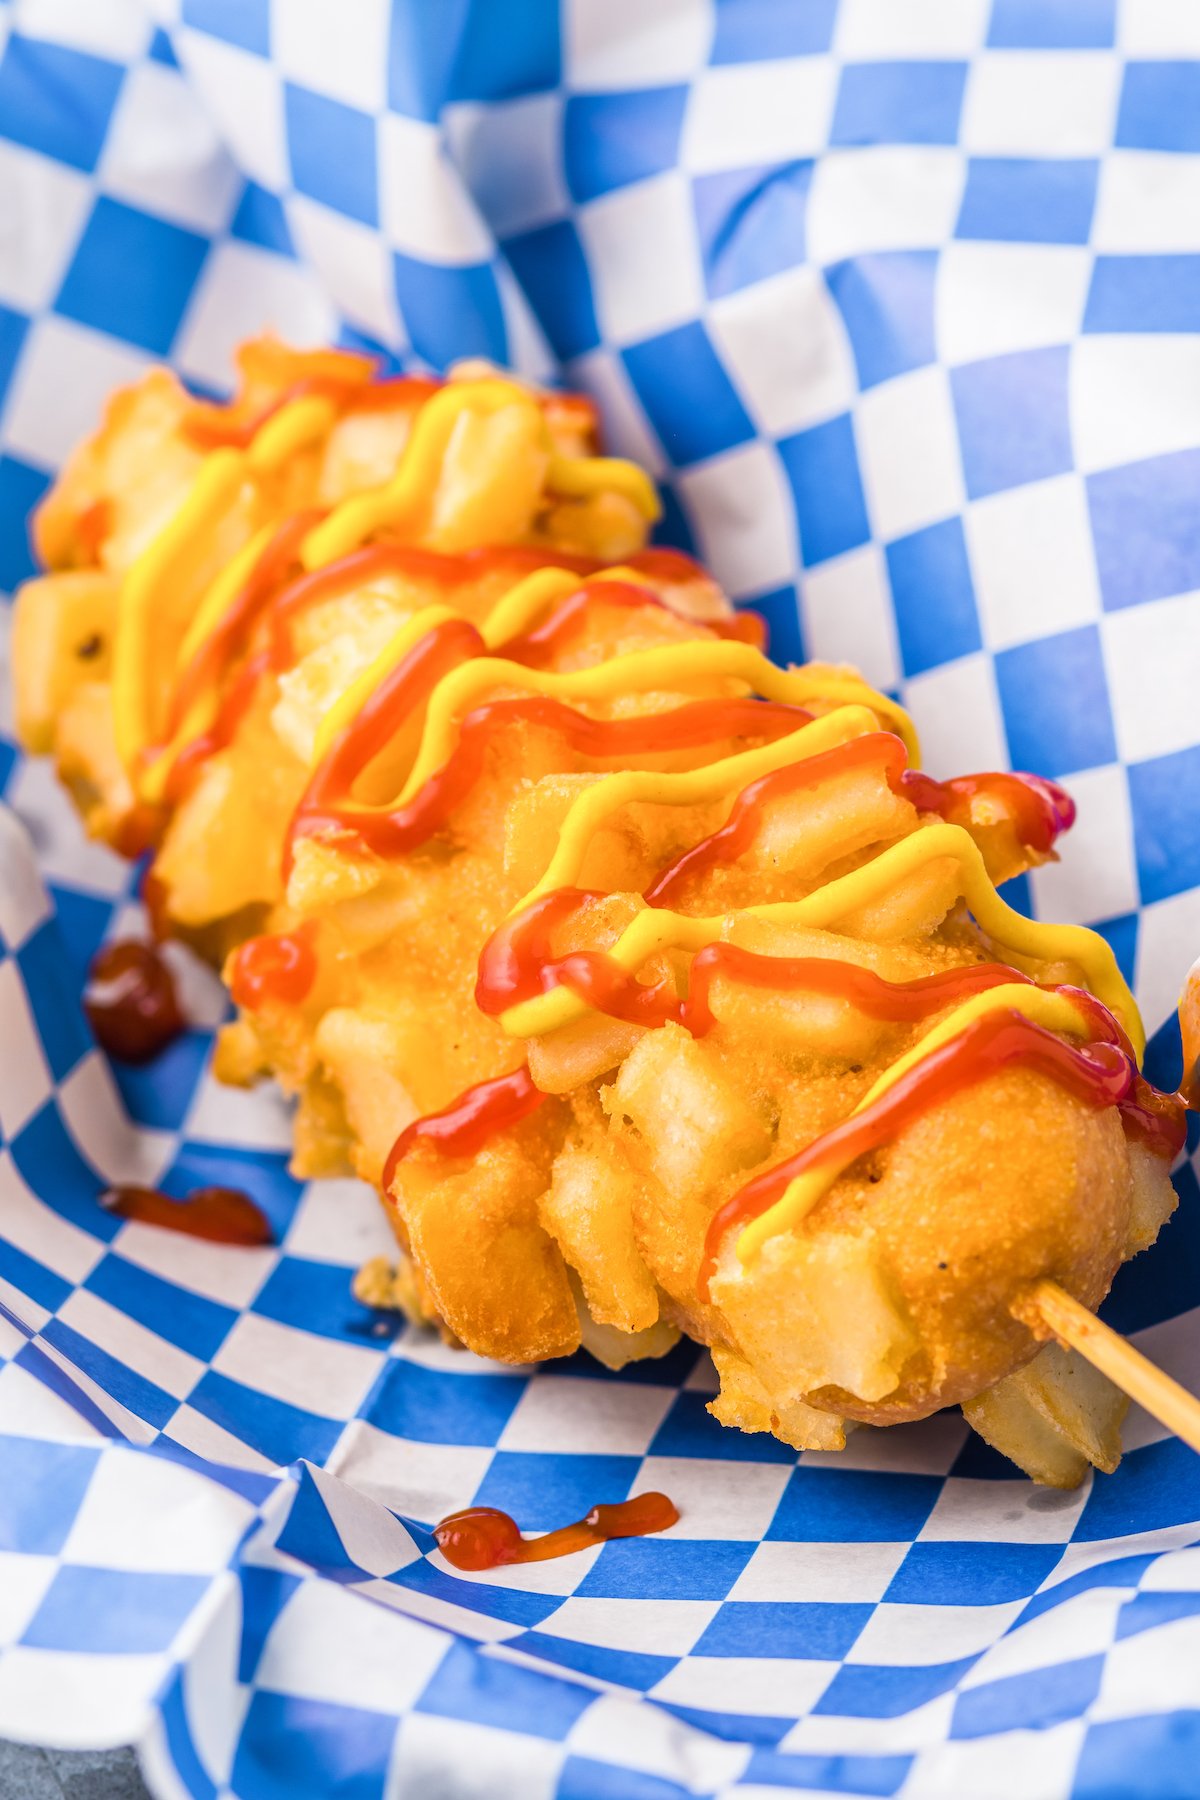 A Korean french fry coated corn dog drizzled with ketchup and mustard sits in a food basket with blue checkered parchment paper.